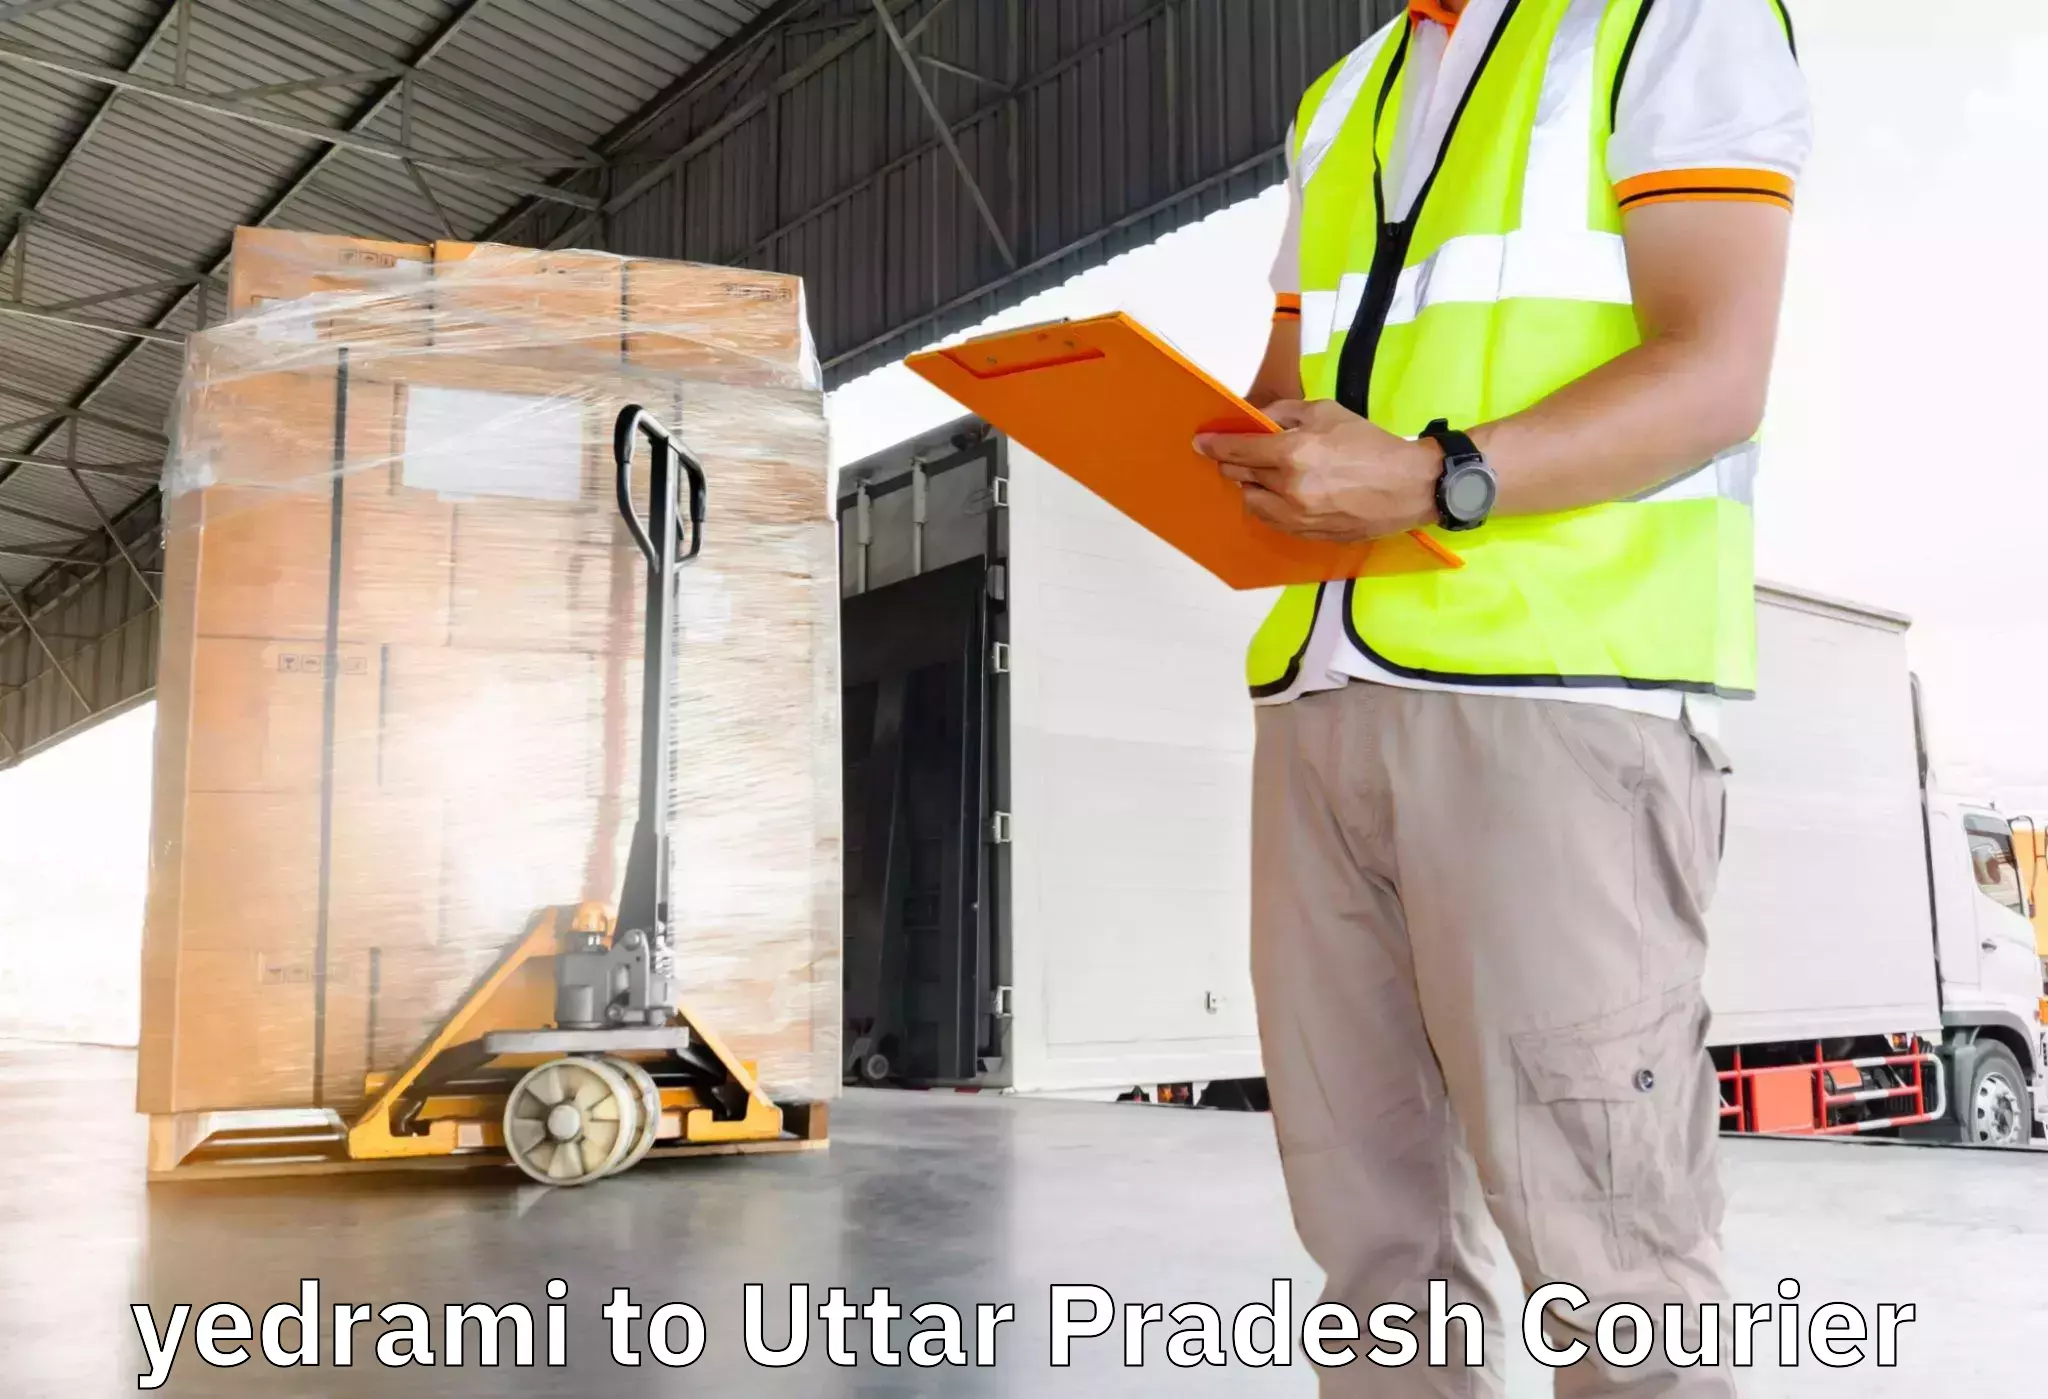 Household moving service yedrami to Sitapur